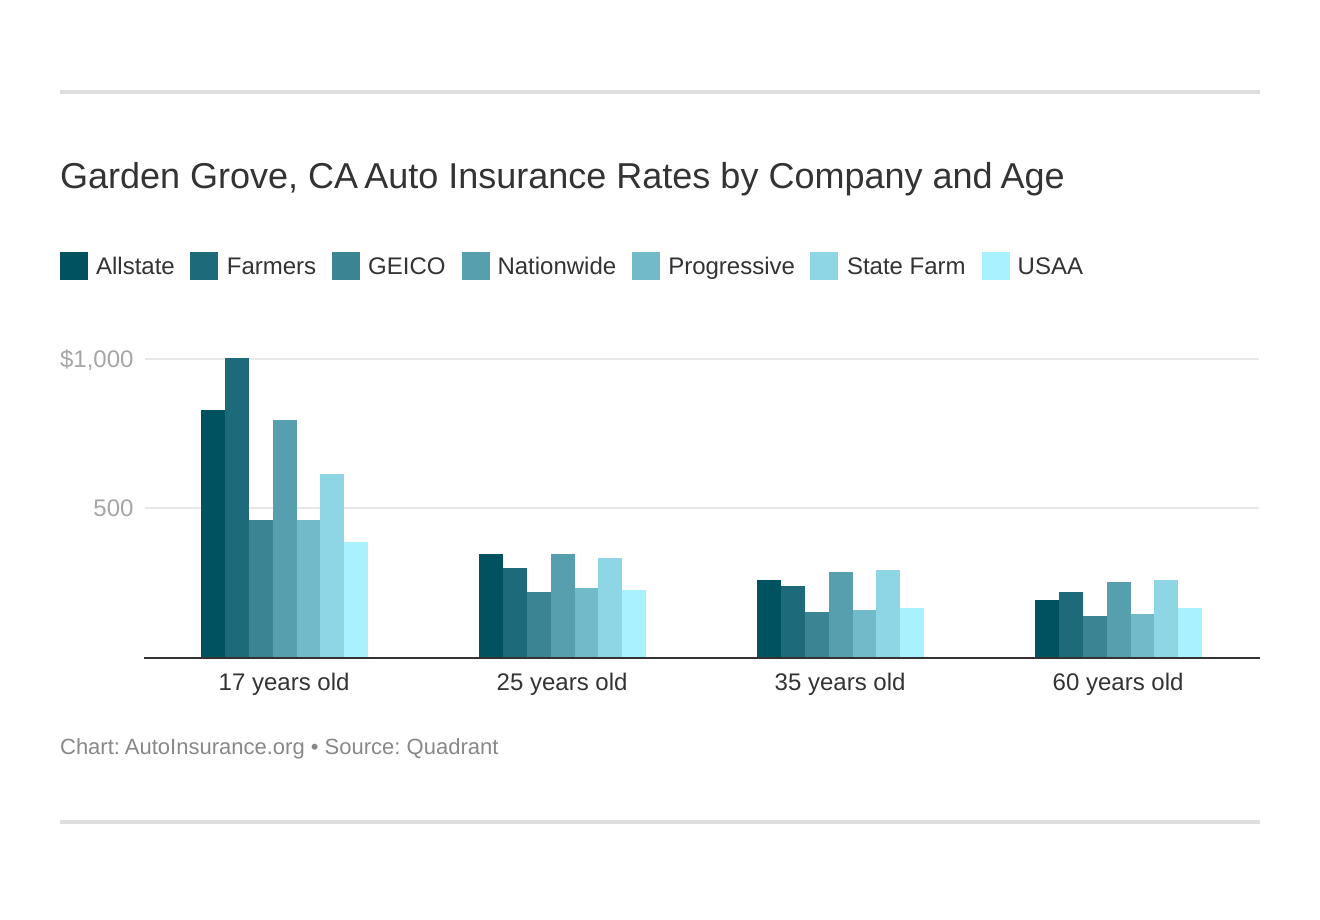 Garden Grove, CA Auto Insurance Rates by Company and Age